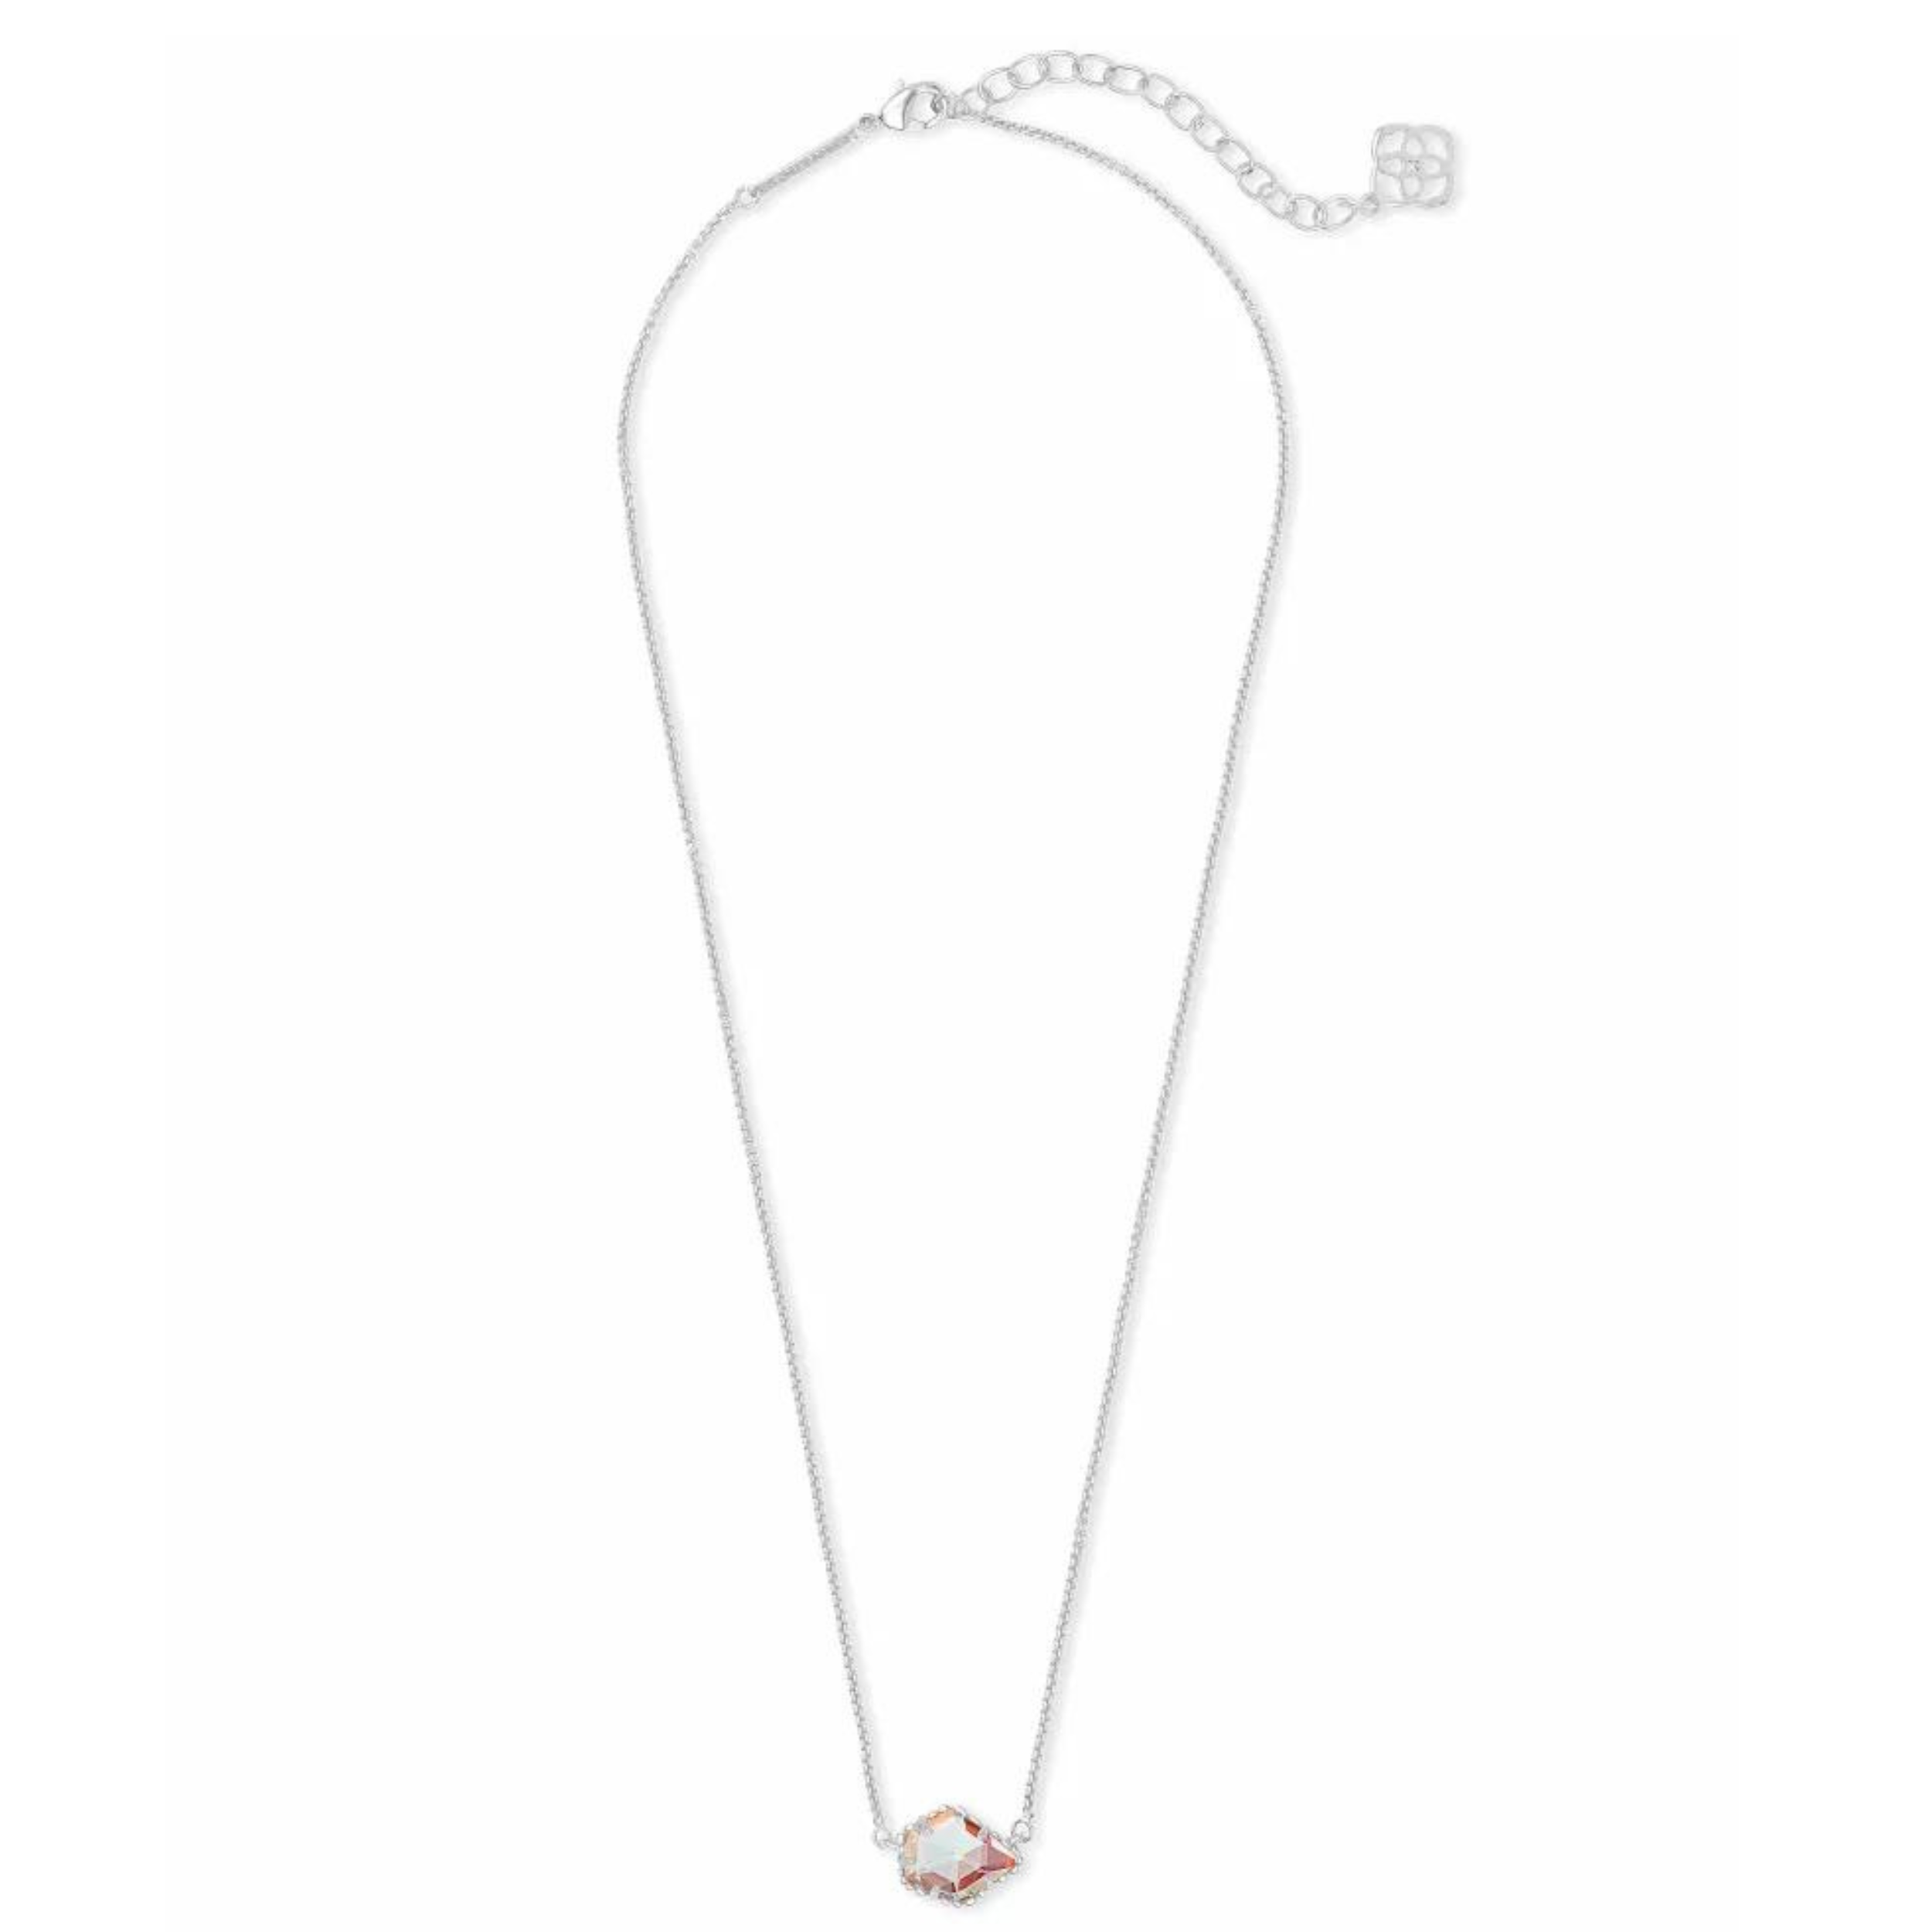 Kendra Scott | Tess Silver Pendant Necklace in Dichroic Glass - Giddy Up Glamour Boutique